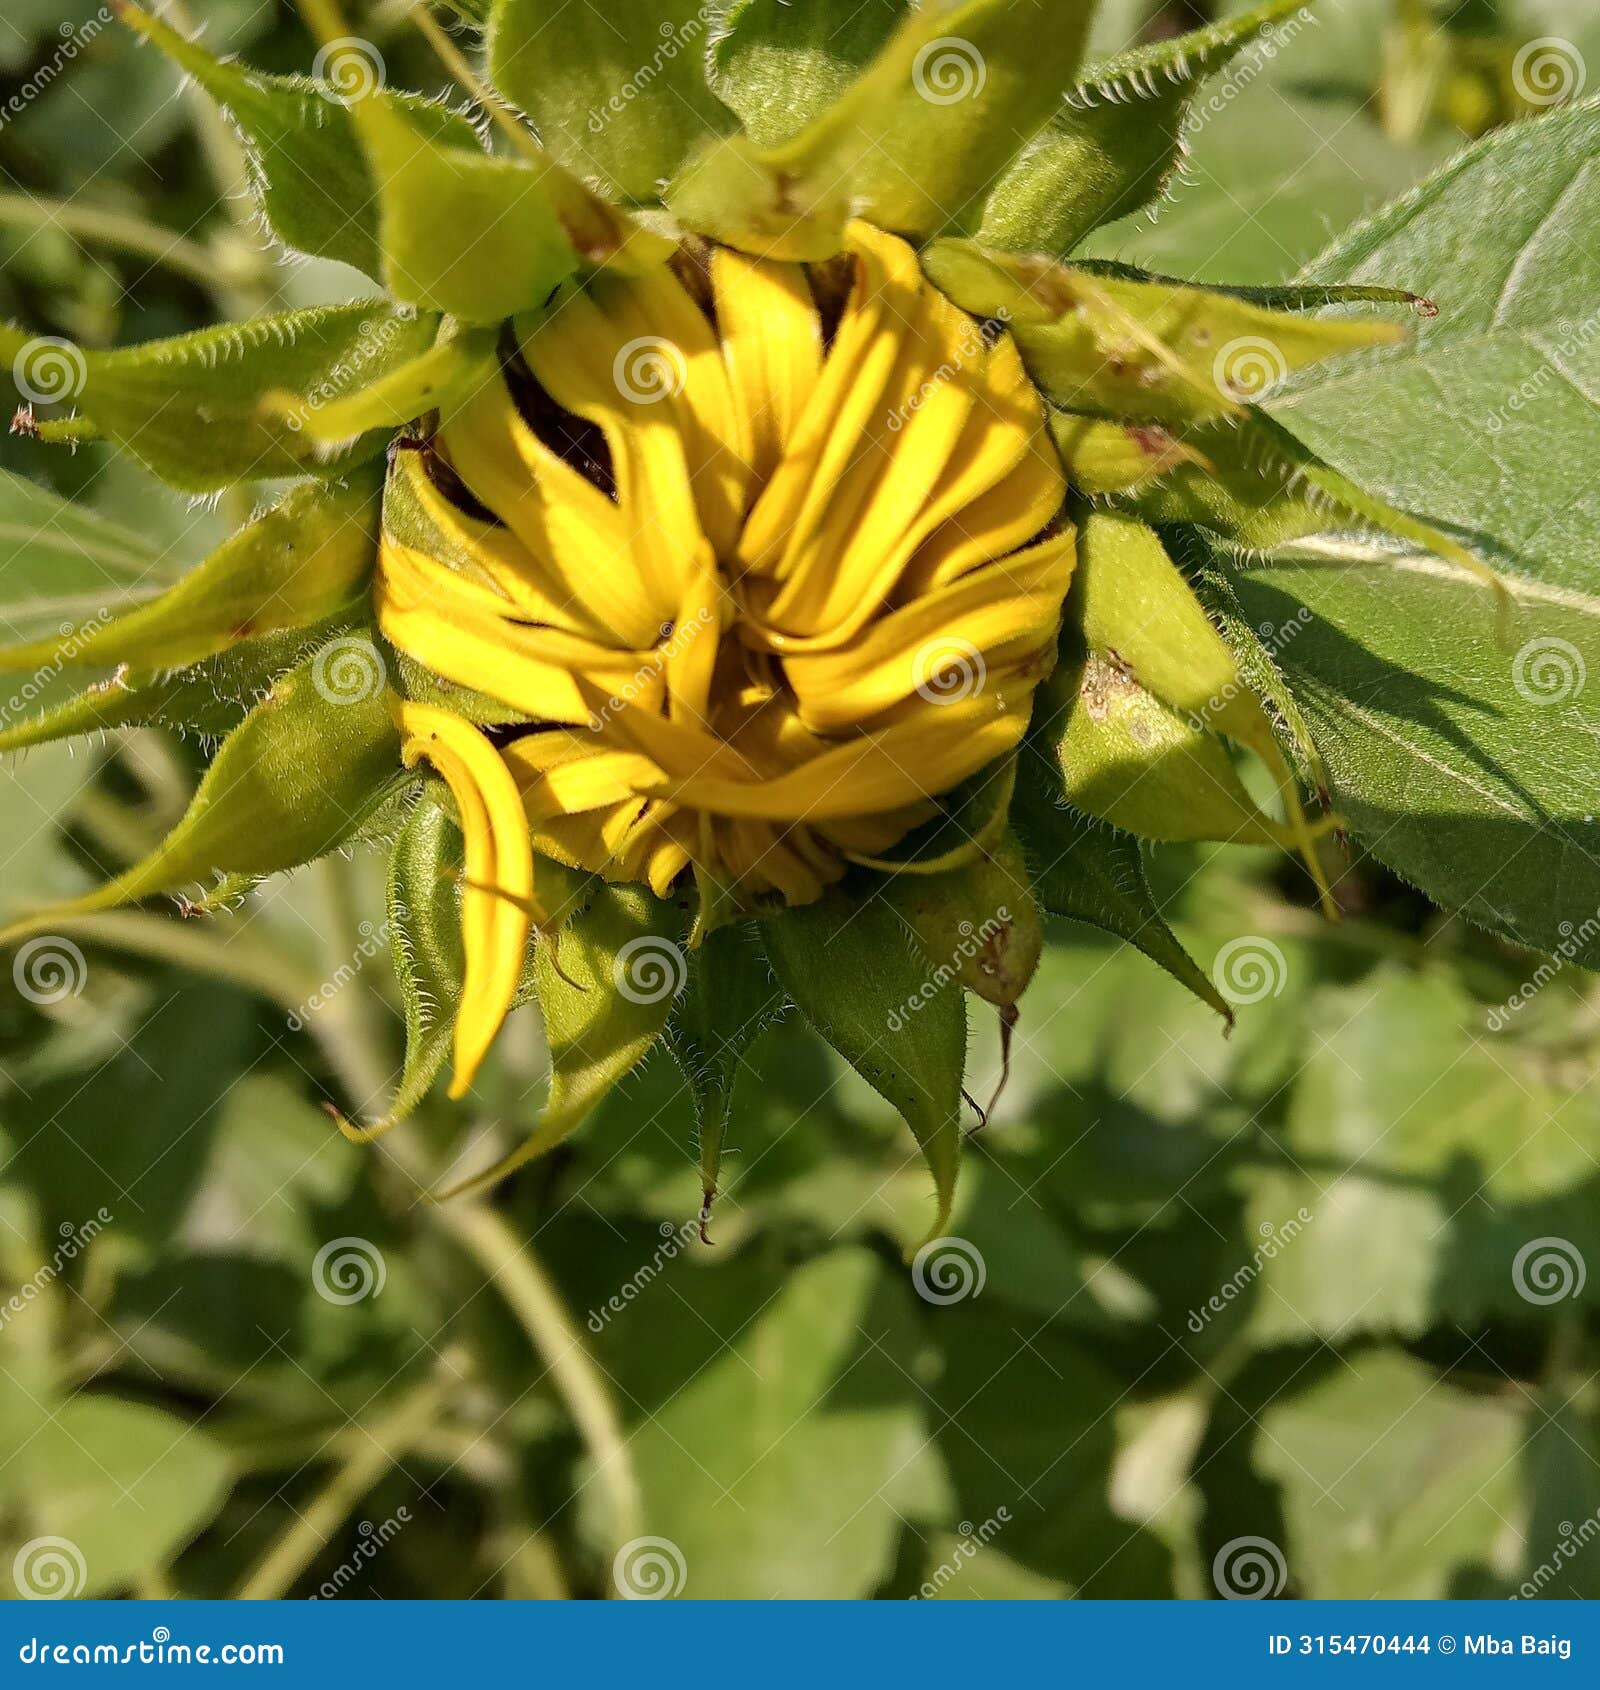 sun flower yellow yet to bloom sepals petals leaves calyx corolla